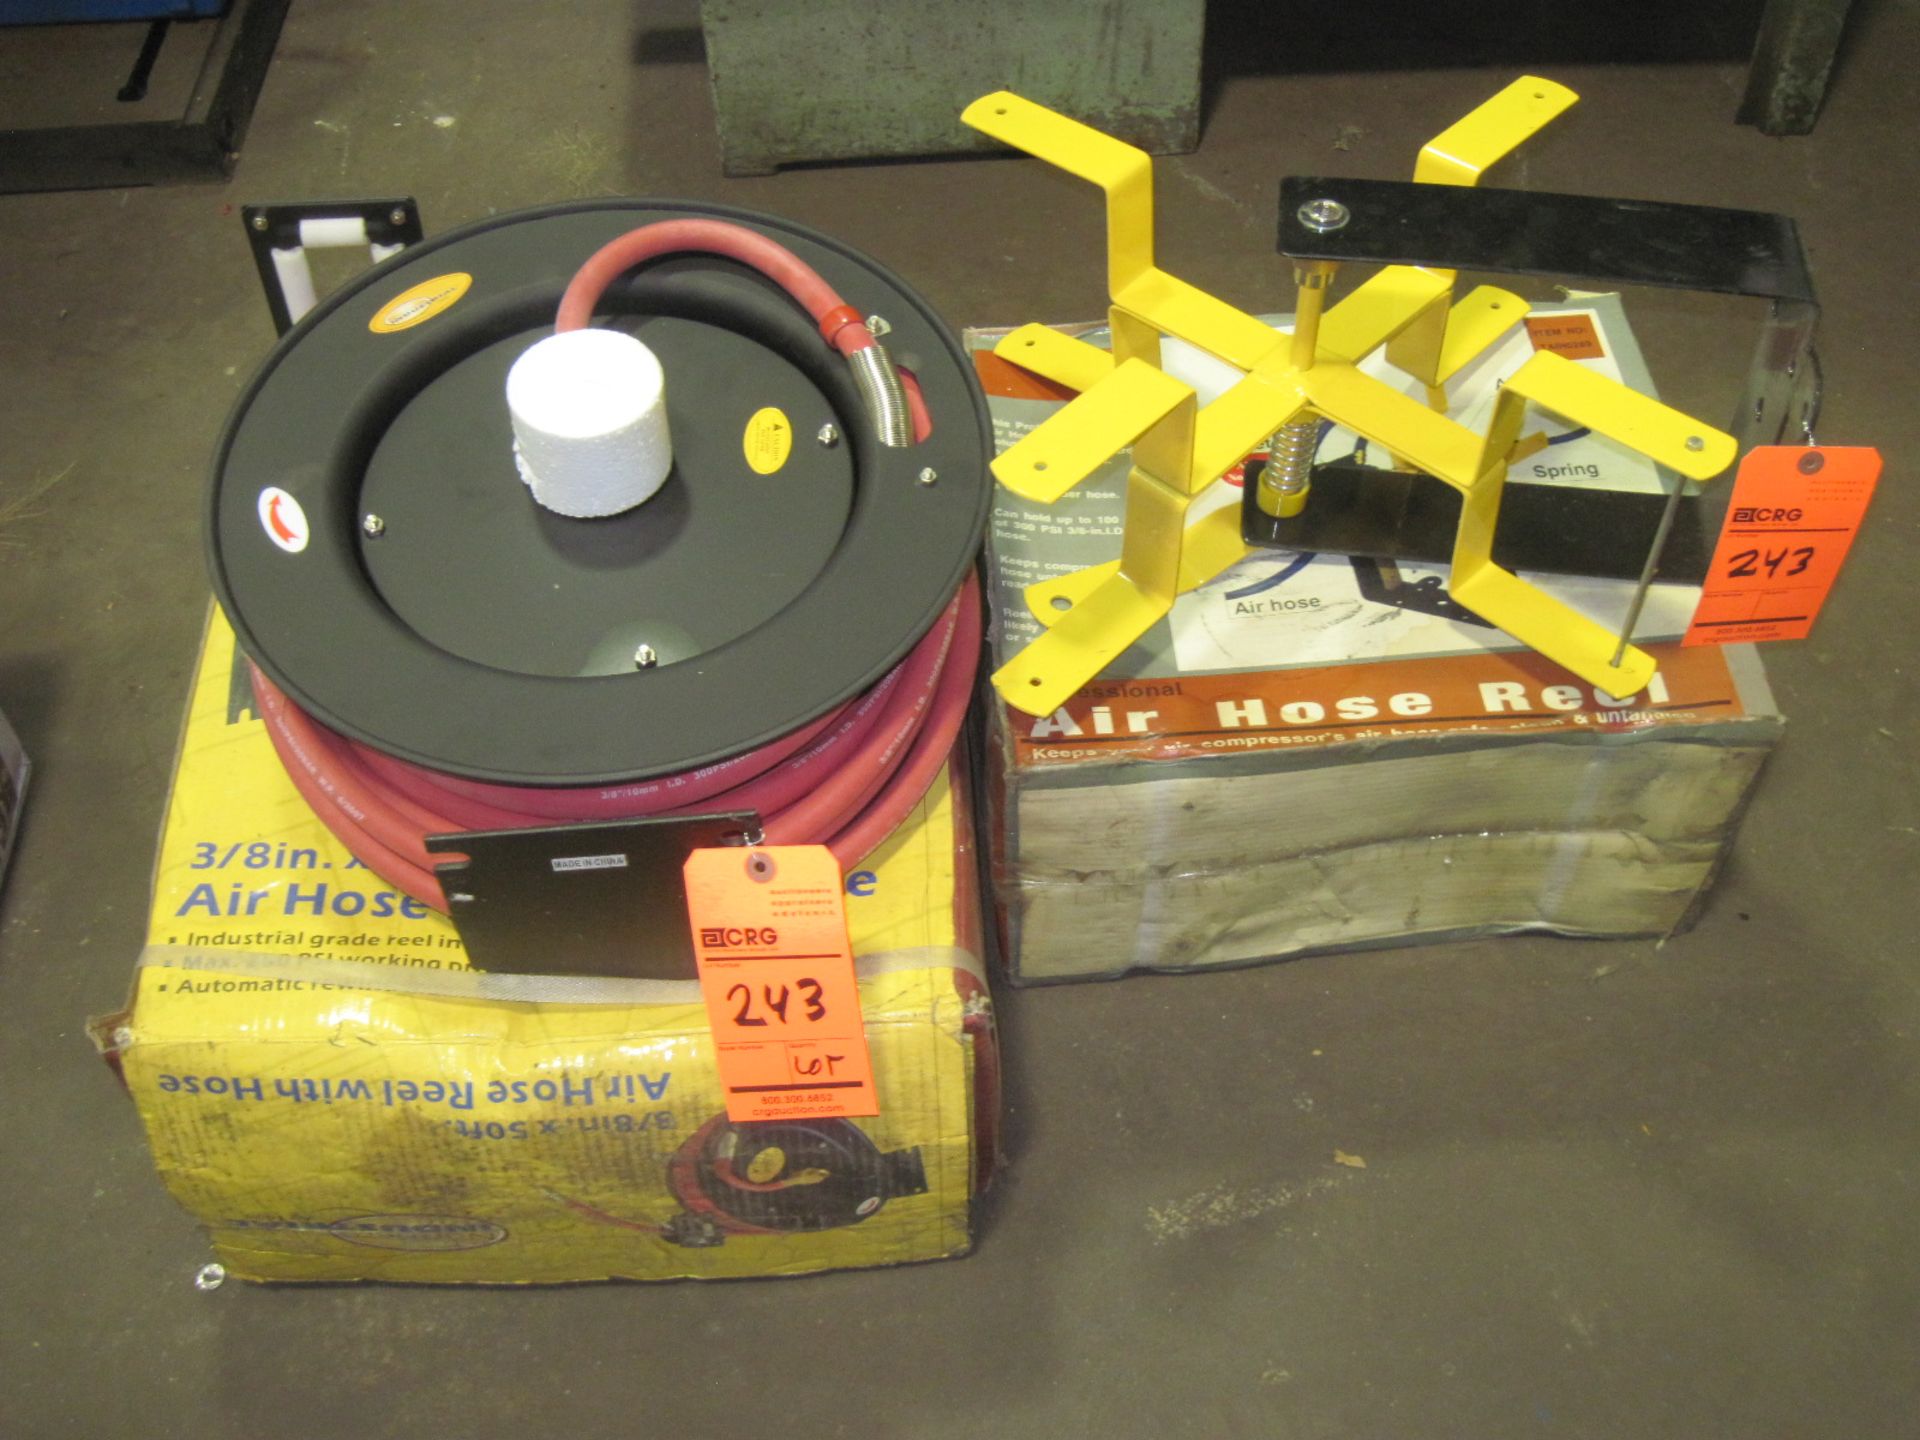 Lot of (2) air hose reels, (1) with hose